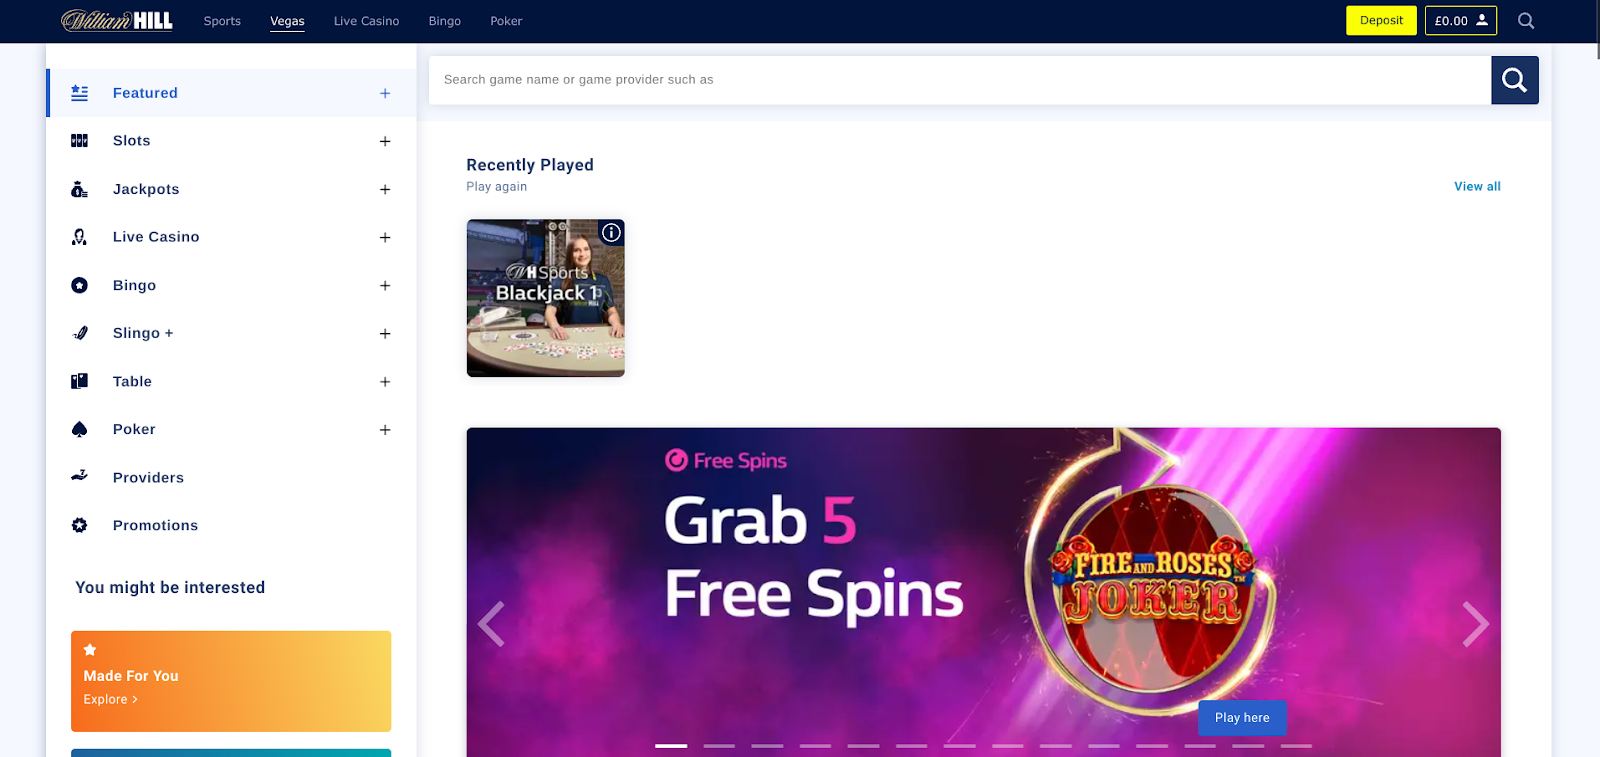 Locate the Deposit tab at the top of the William Hill Casino homepage.